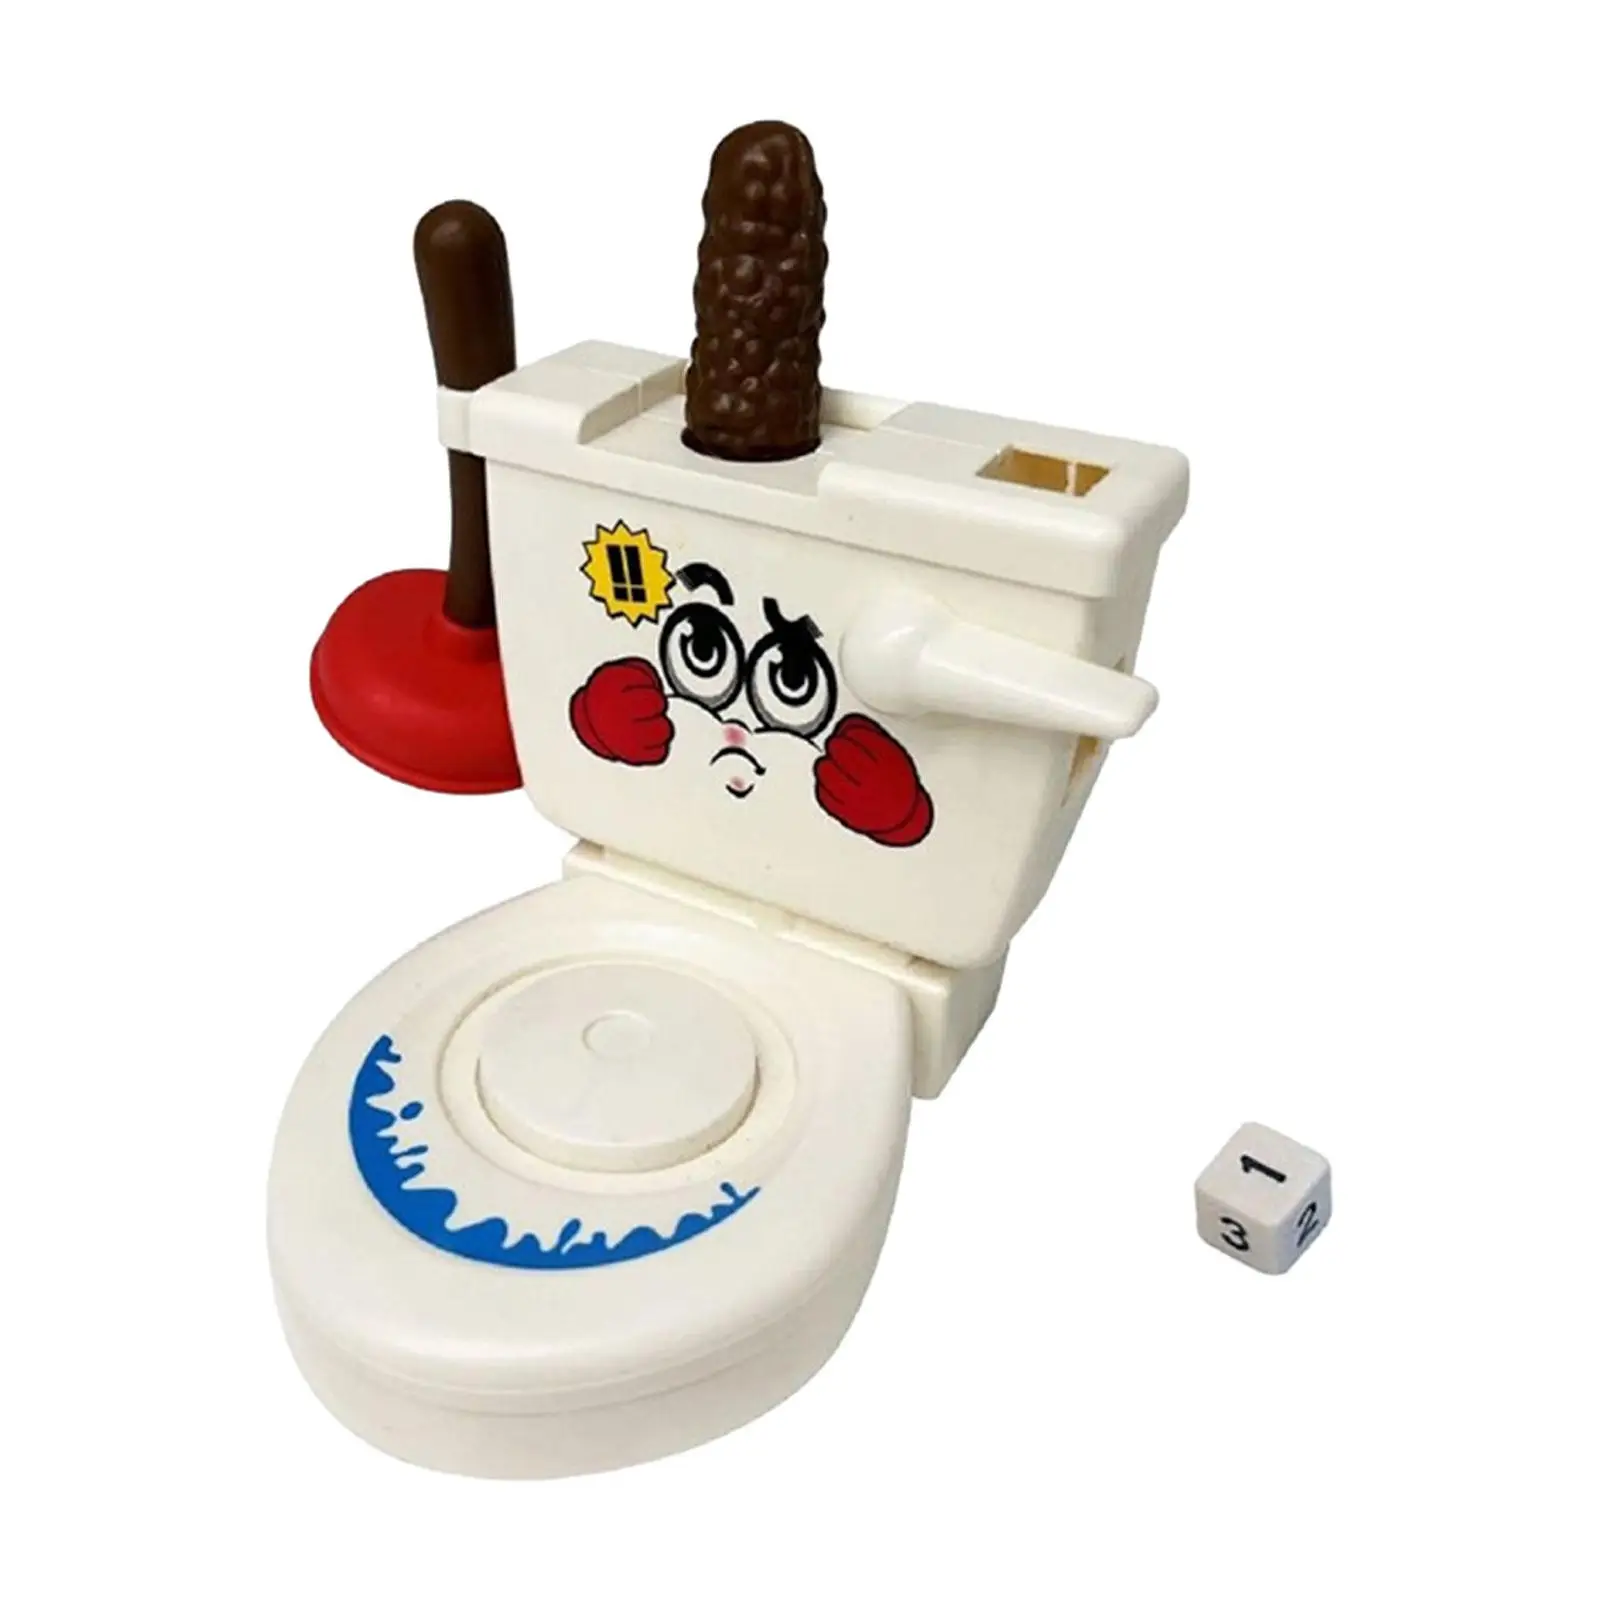 Poop Game Children`s Sensory Toys Toilet Poop Toys Simulation Toilet Ejection Toy for Kid Children Girls Boys Todders Xmas Gifts